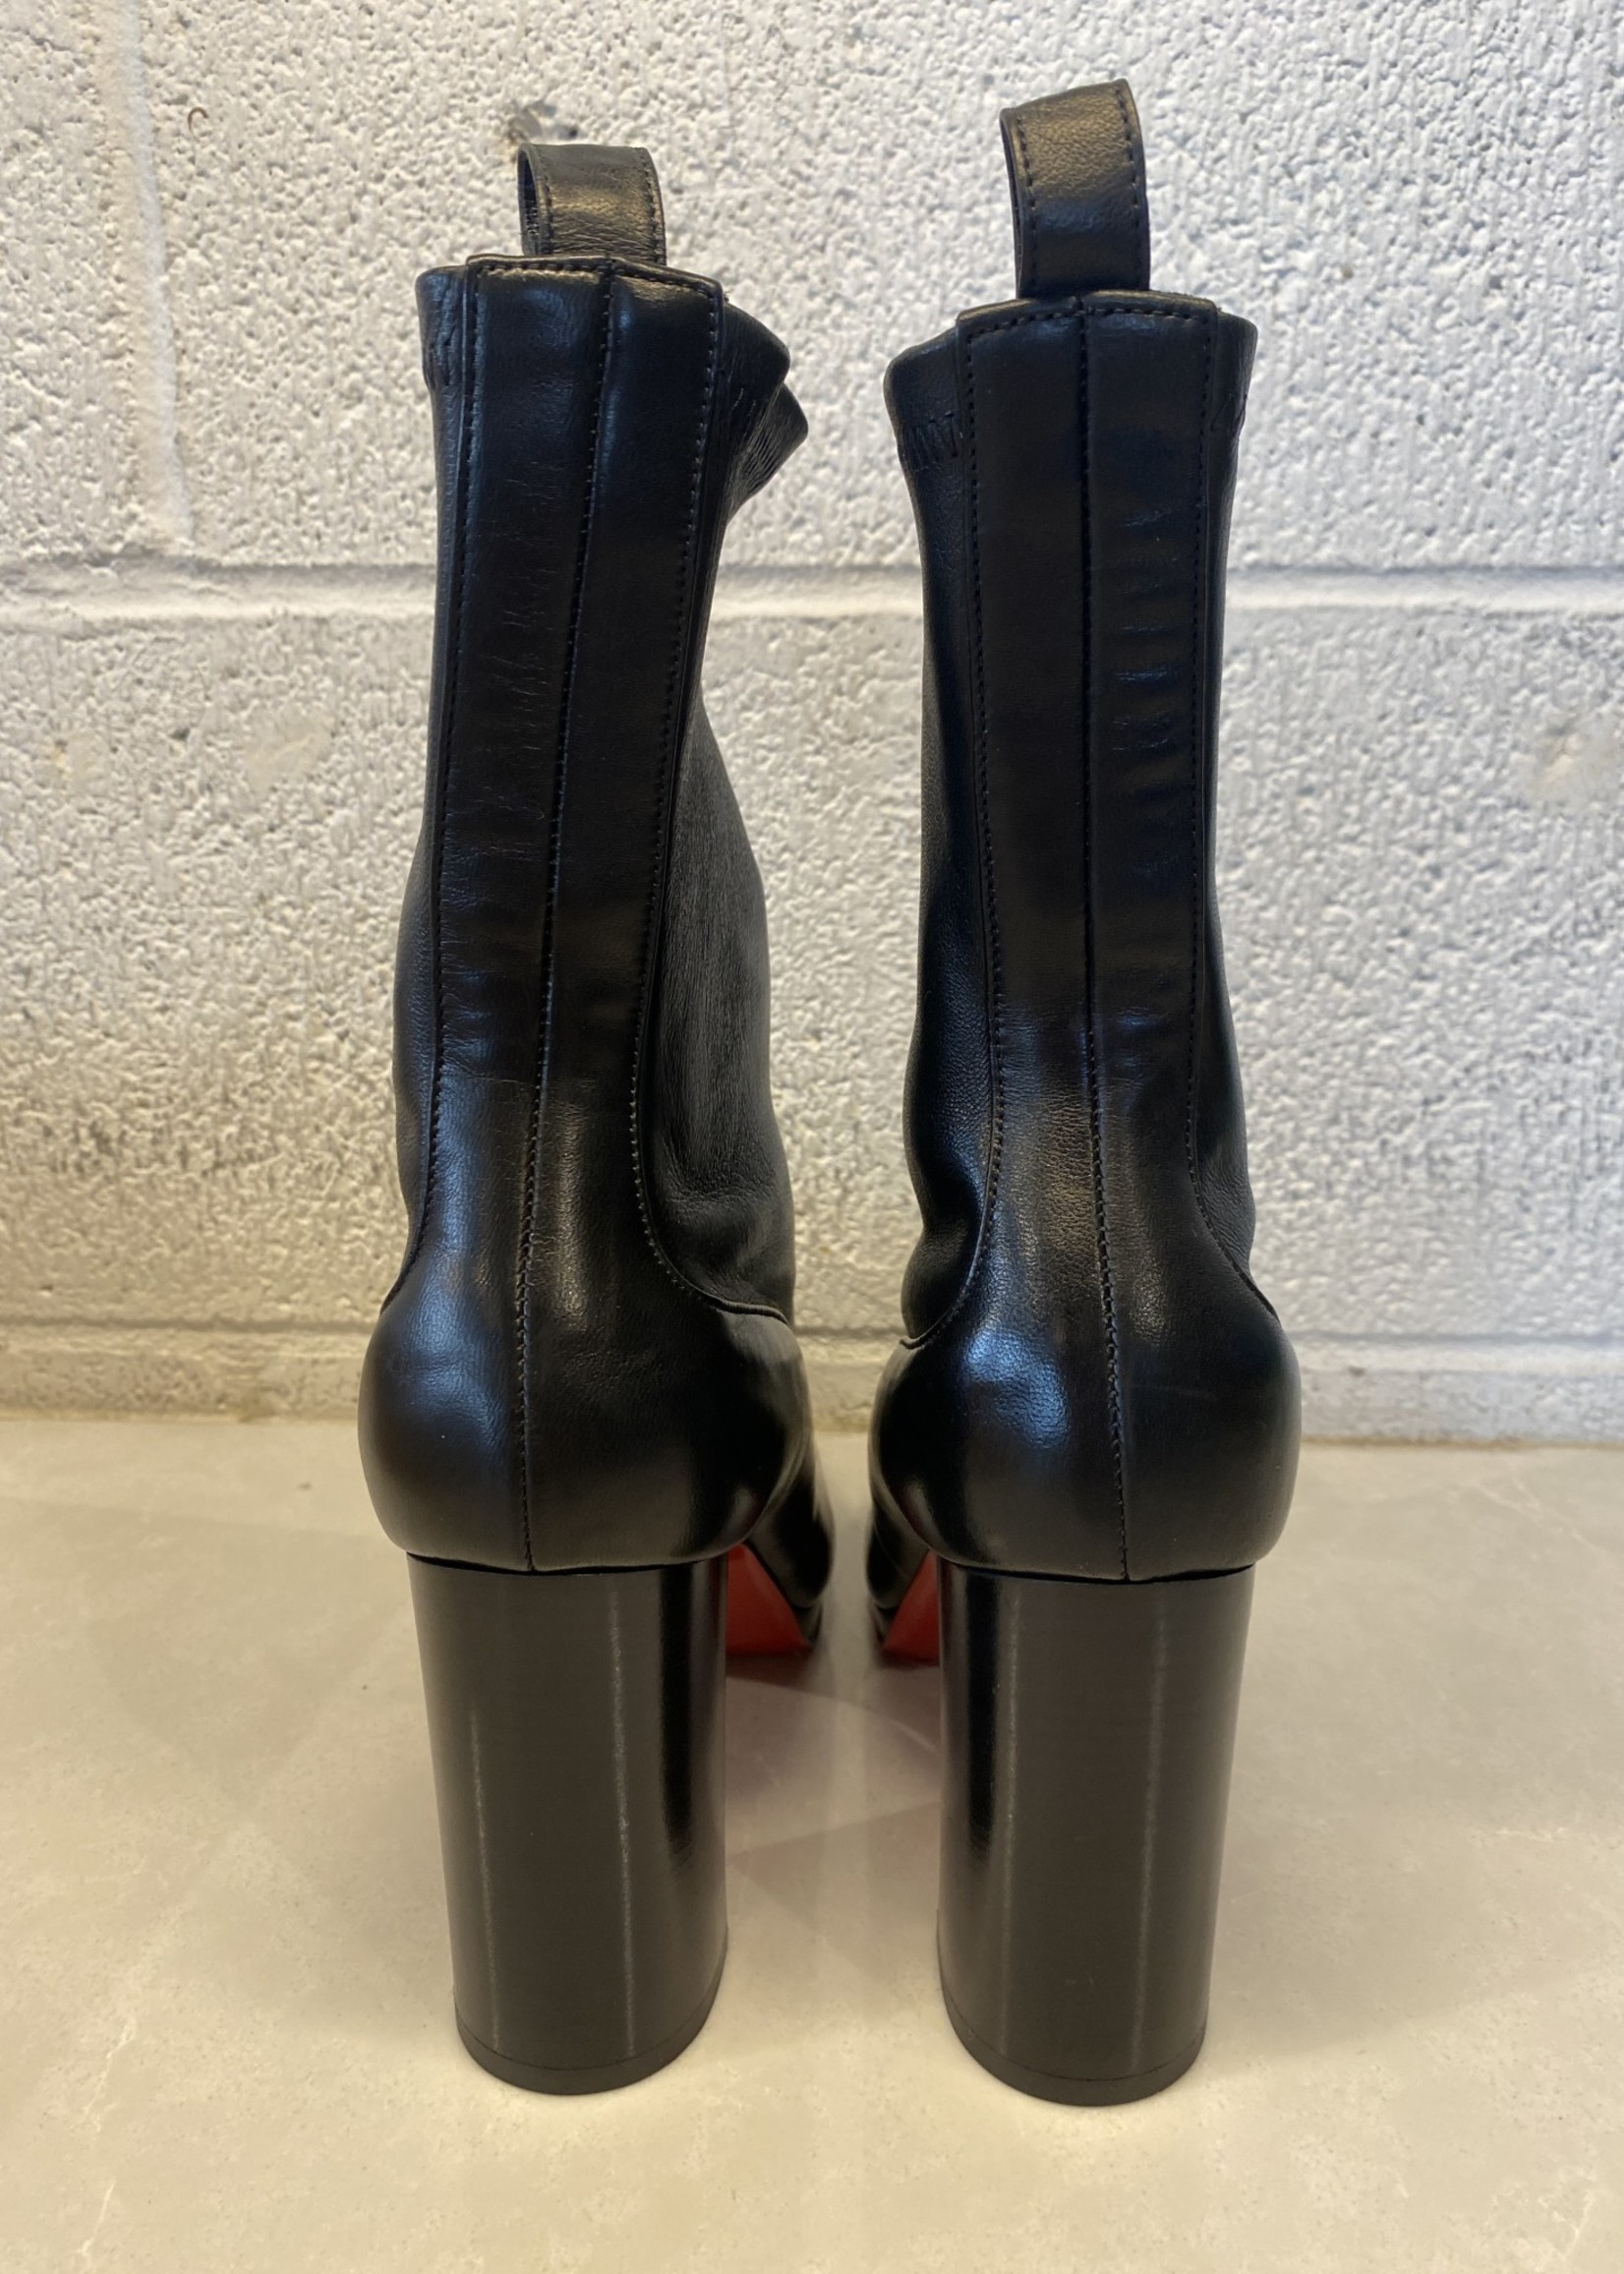 Christian Louboutin 'Contrevent 100' Leather Boots (Retail: $995) 37.5